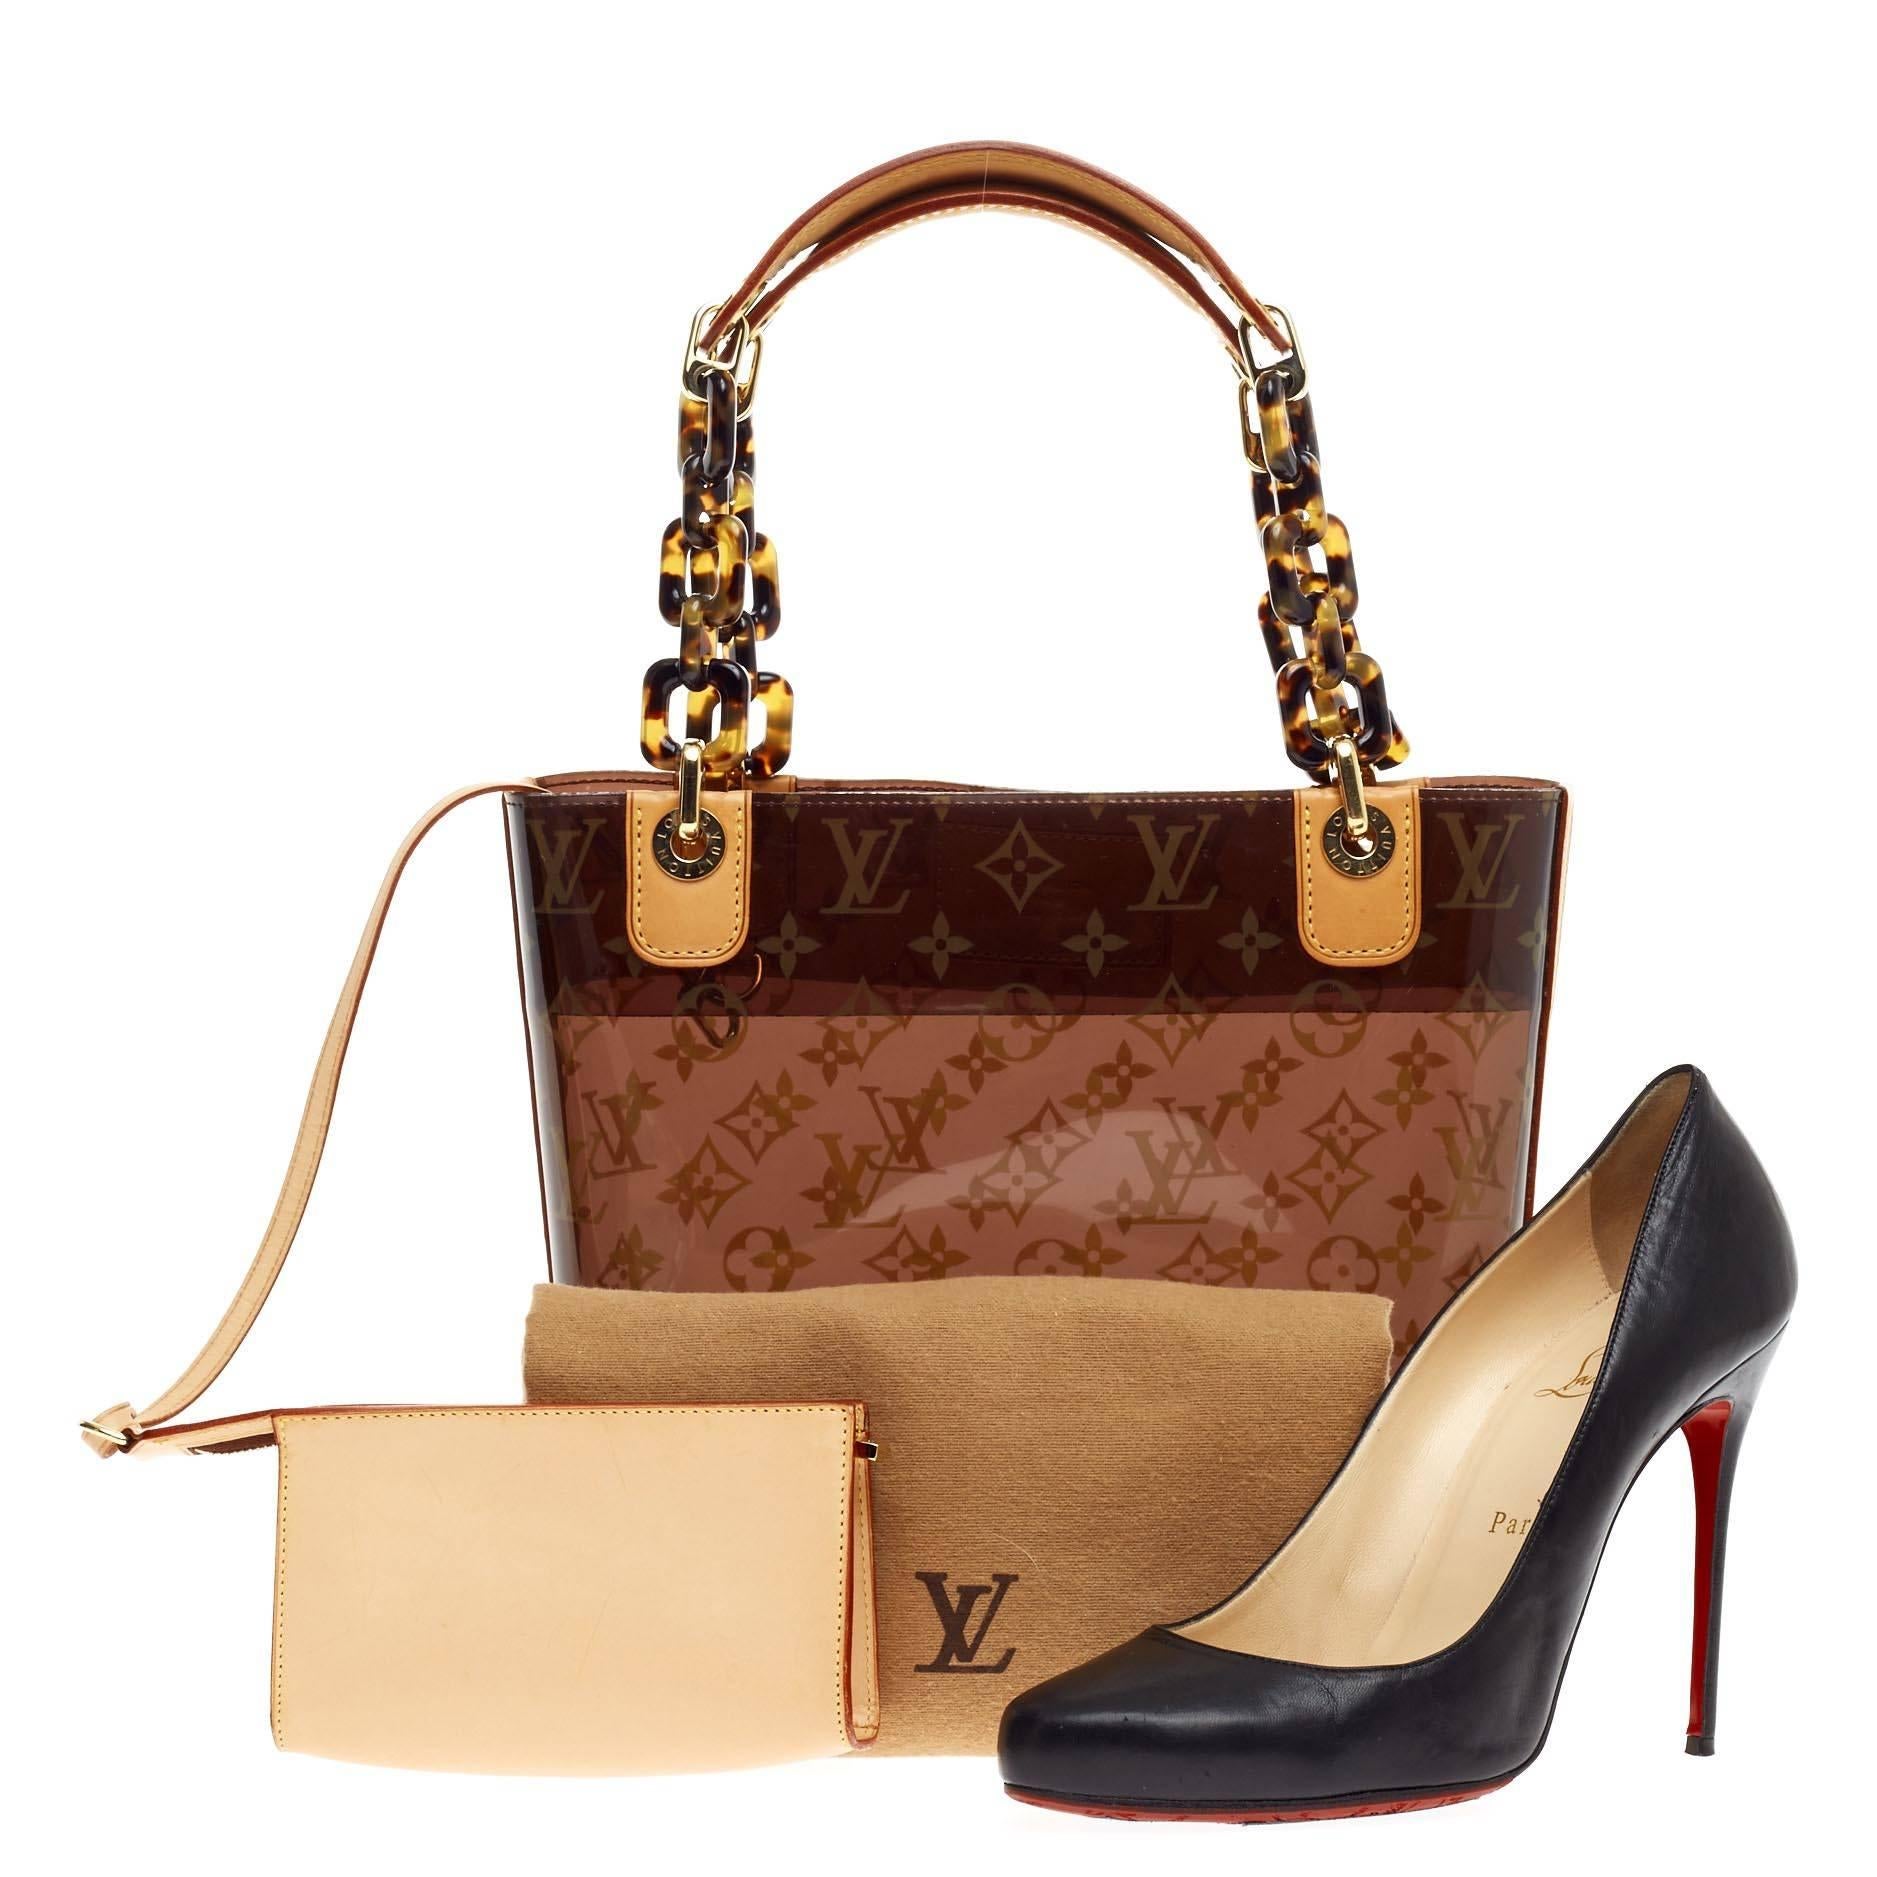 This authentic Louis Vuitton Sac Ambre Monogram Vinyl PM showcases a playful design perfect for casual days. The smallest of Louis Vuitton's Sac Ambre Collection, this petite bag is constructed from monogram printed clear PVC and accented with